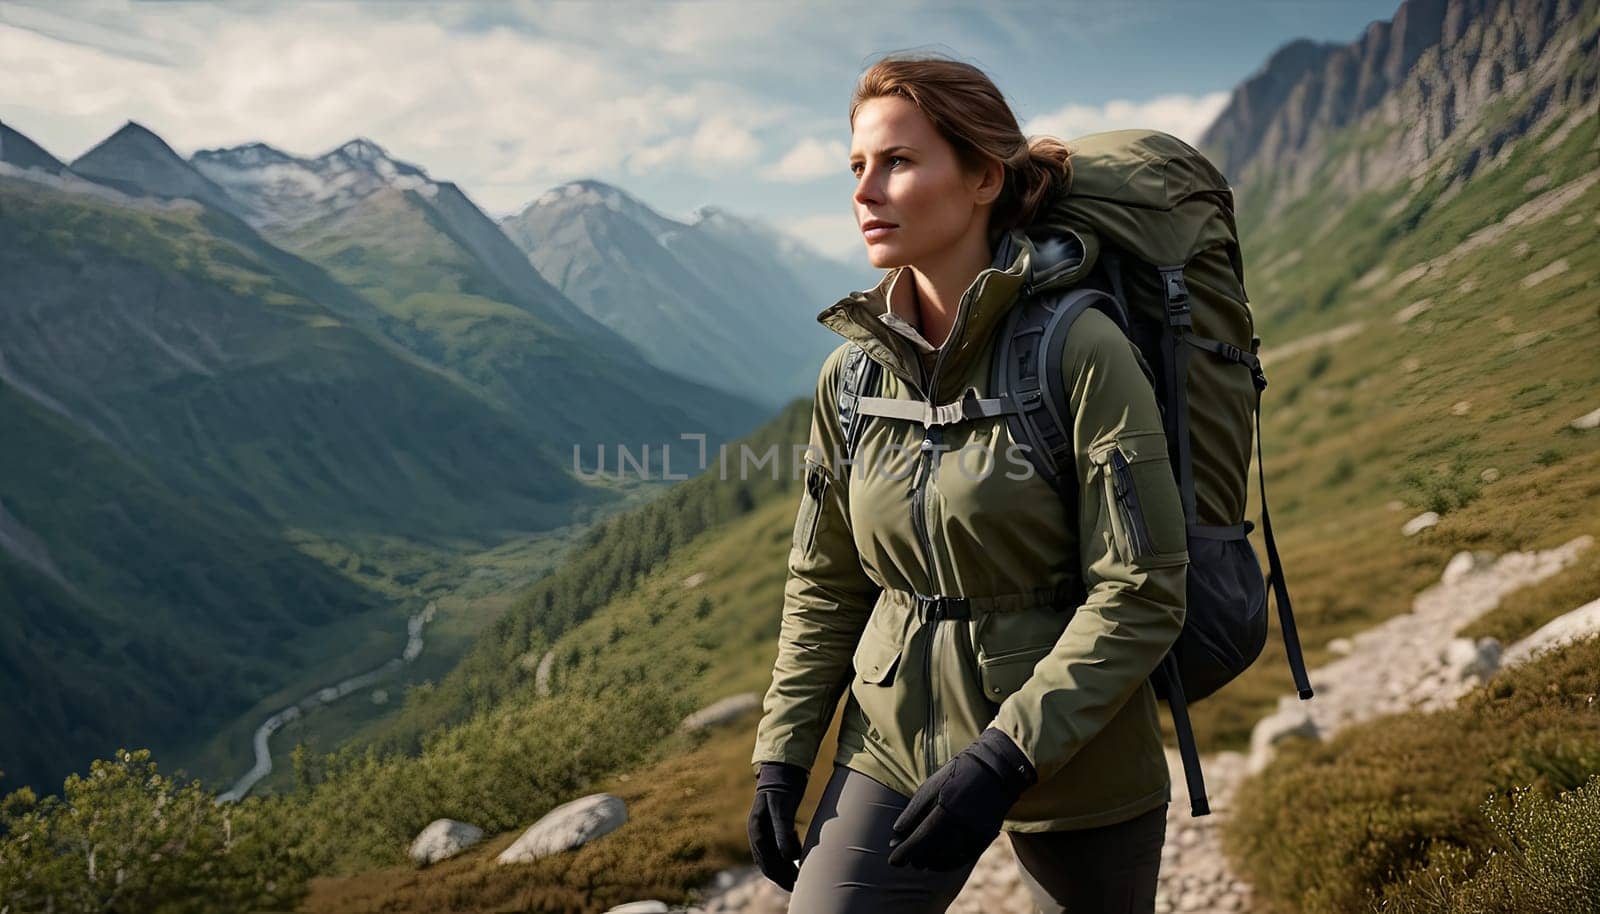 A woman is hiking up a mountain with a backpack on her back. She is wearing a green jacket and gloves. Concept of adventure and determination as the woman prepares to conquer the mountain